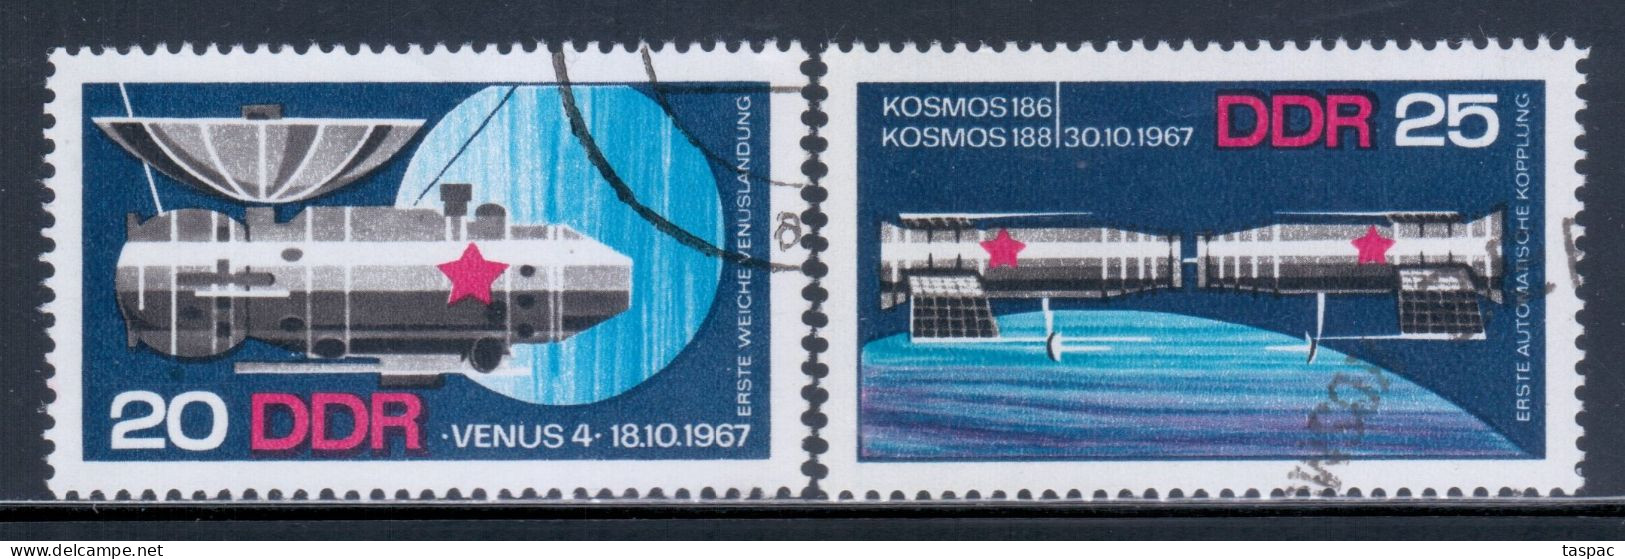 East Germany / DDR 1968 Mi# 1341-1342 Used - Russian Space Explorations - Europa